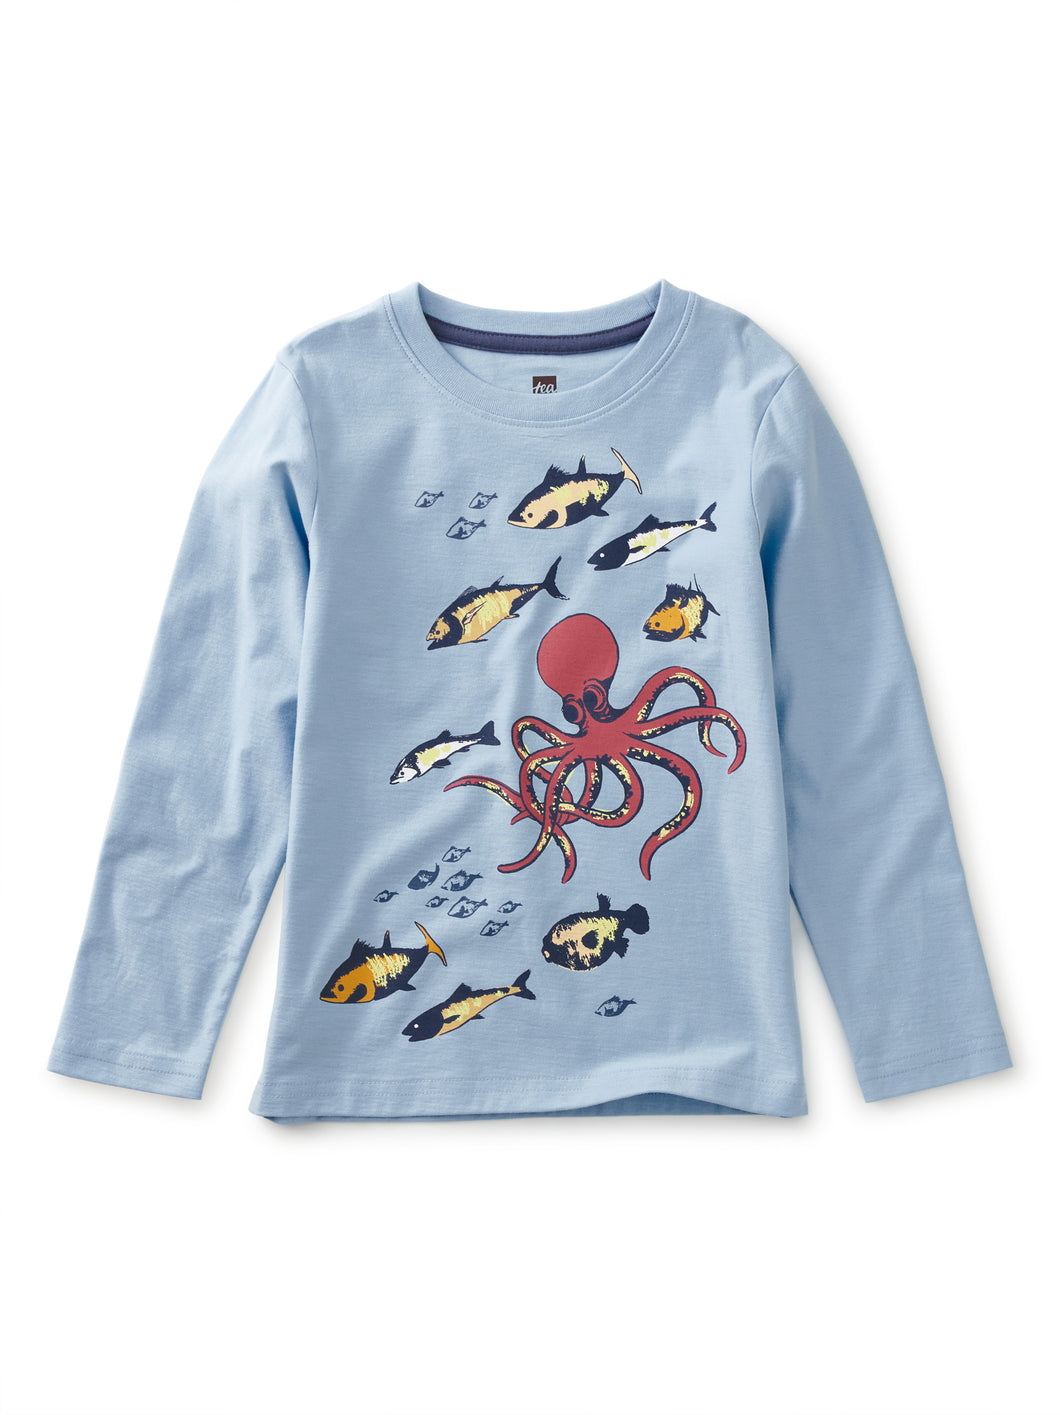 Tea Collection Long Sleeve Graphic Tee - Octo & Friends